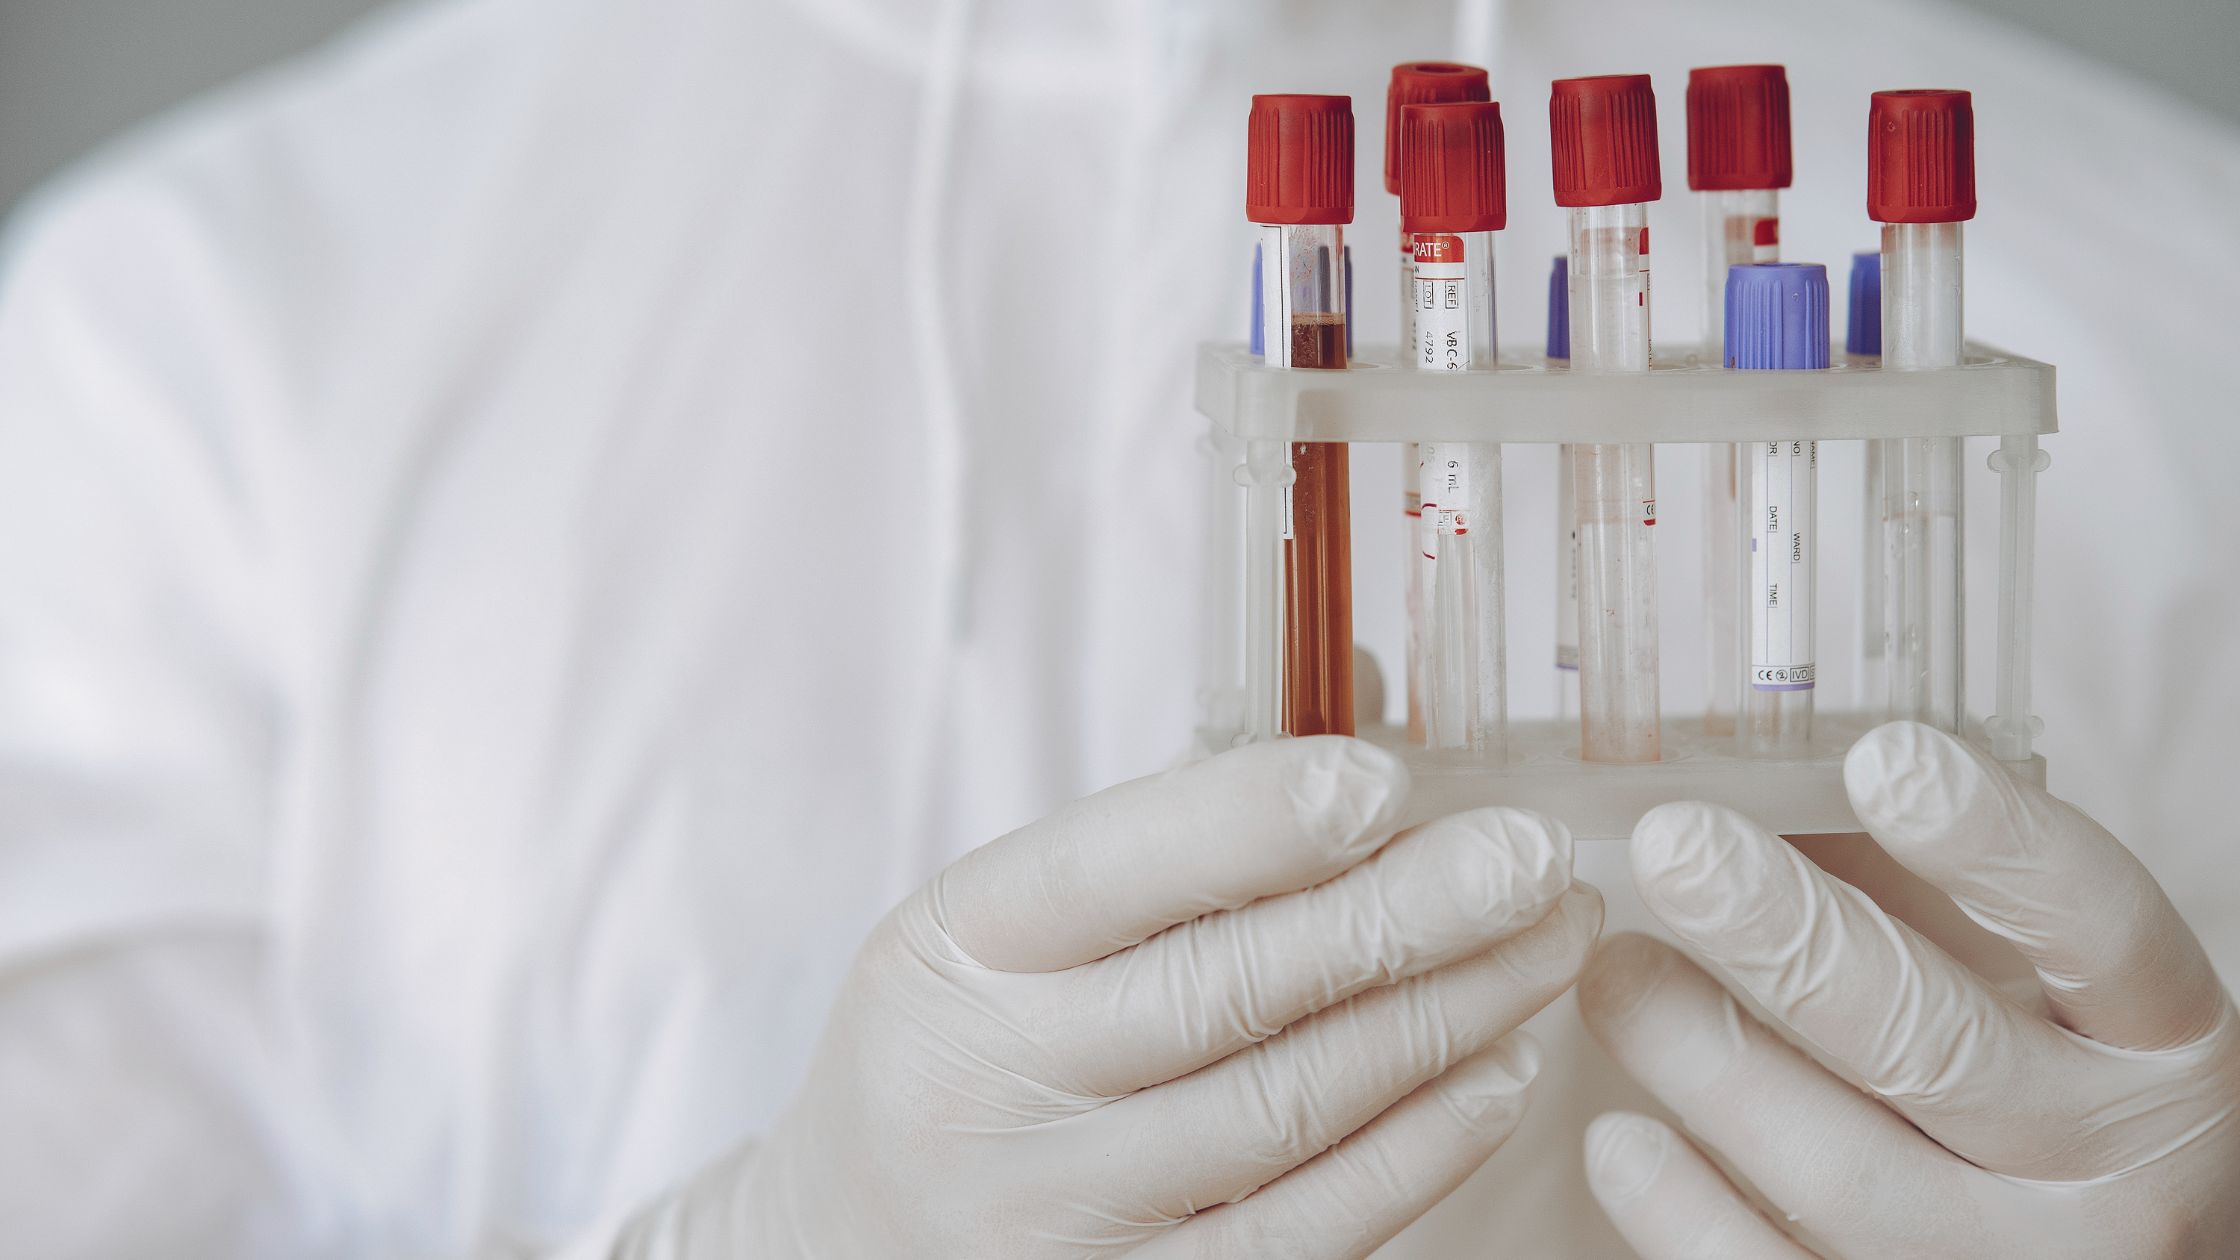 Why Do Providers Order So Many Lab Tests?